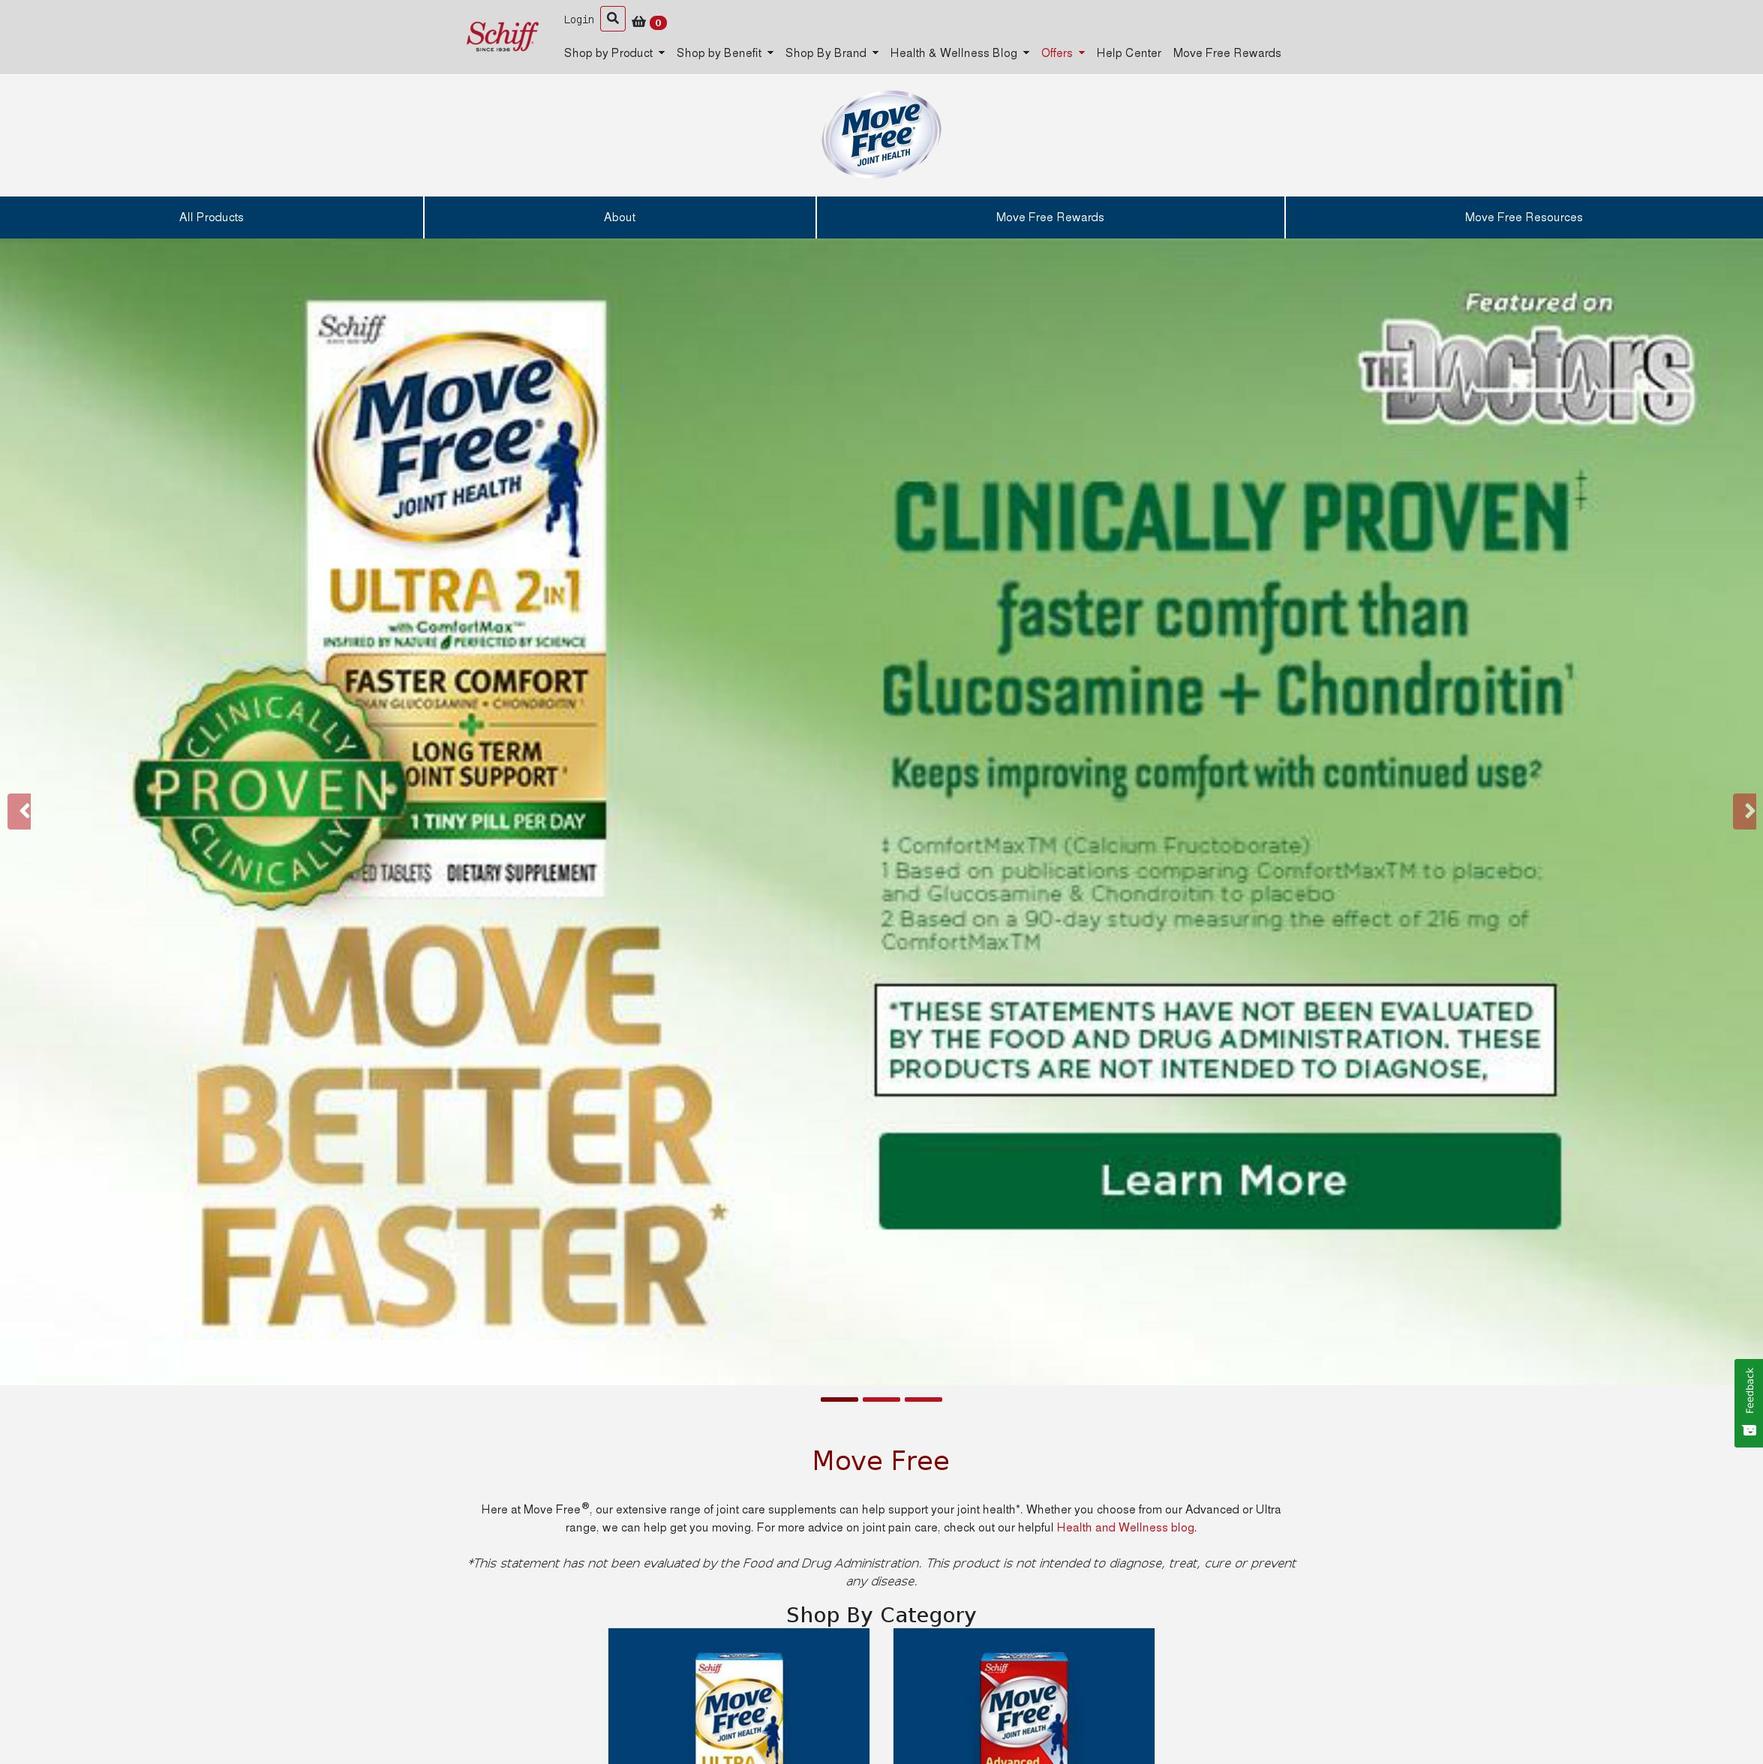 Schiff Vitamins - Updated 8\/3 Shopify theme site example movefree.com